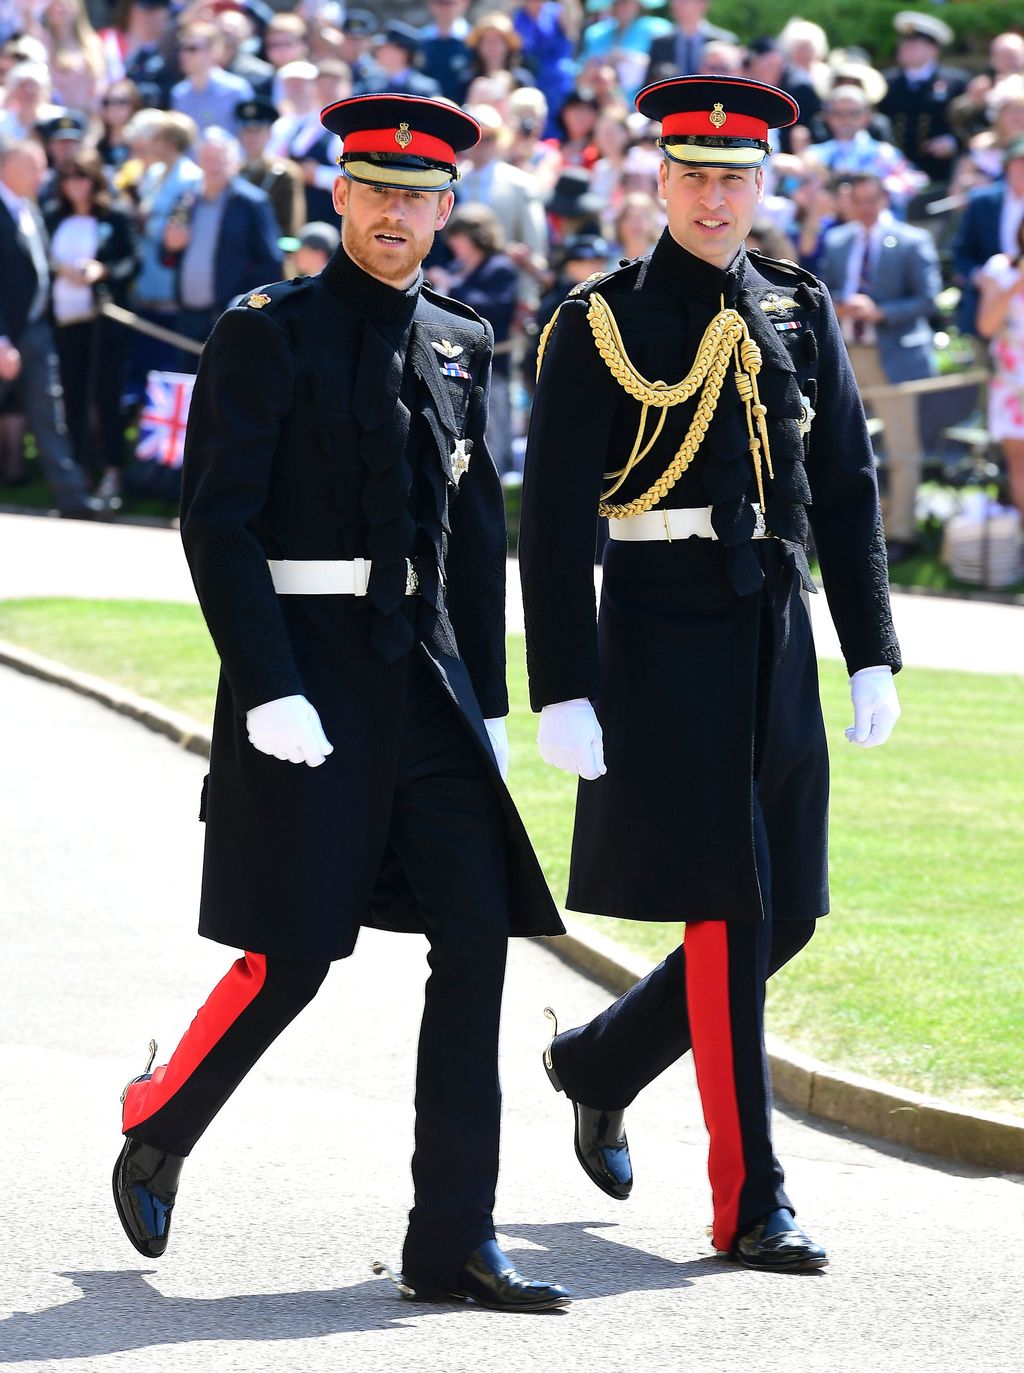 Prince Harry and The Duke of Cambridge arrive at St George's Chapel at Windsor Castle for the wedding of Meghan Markle and Prince Harry in Windsor, Britain, May 19, 2018. Ian West/Pool via REUTERS